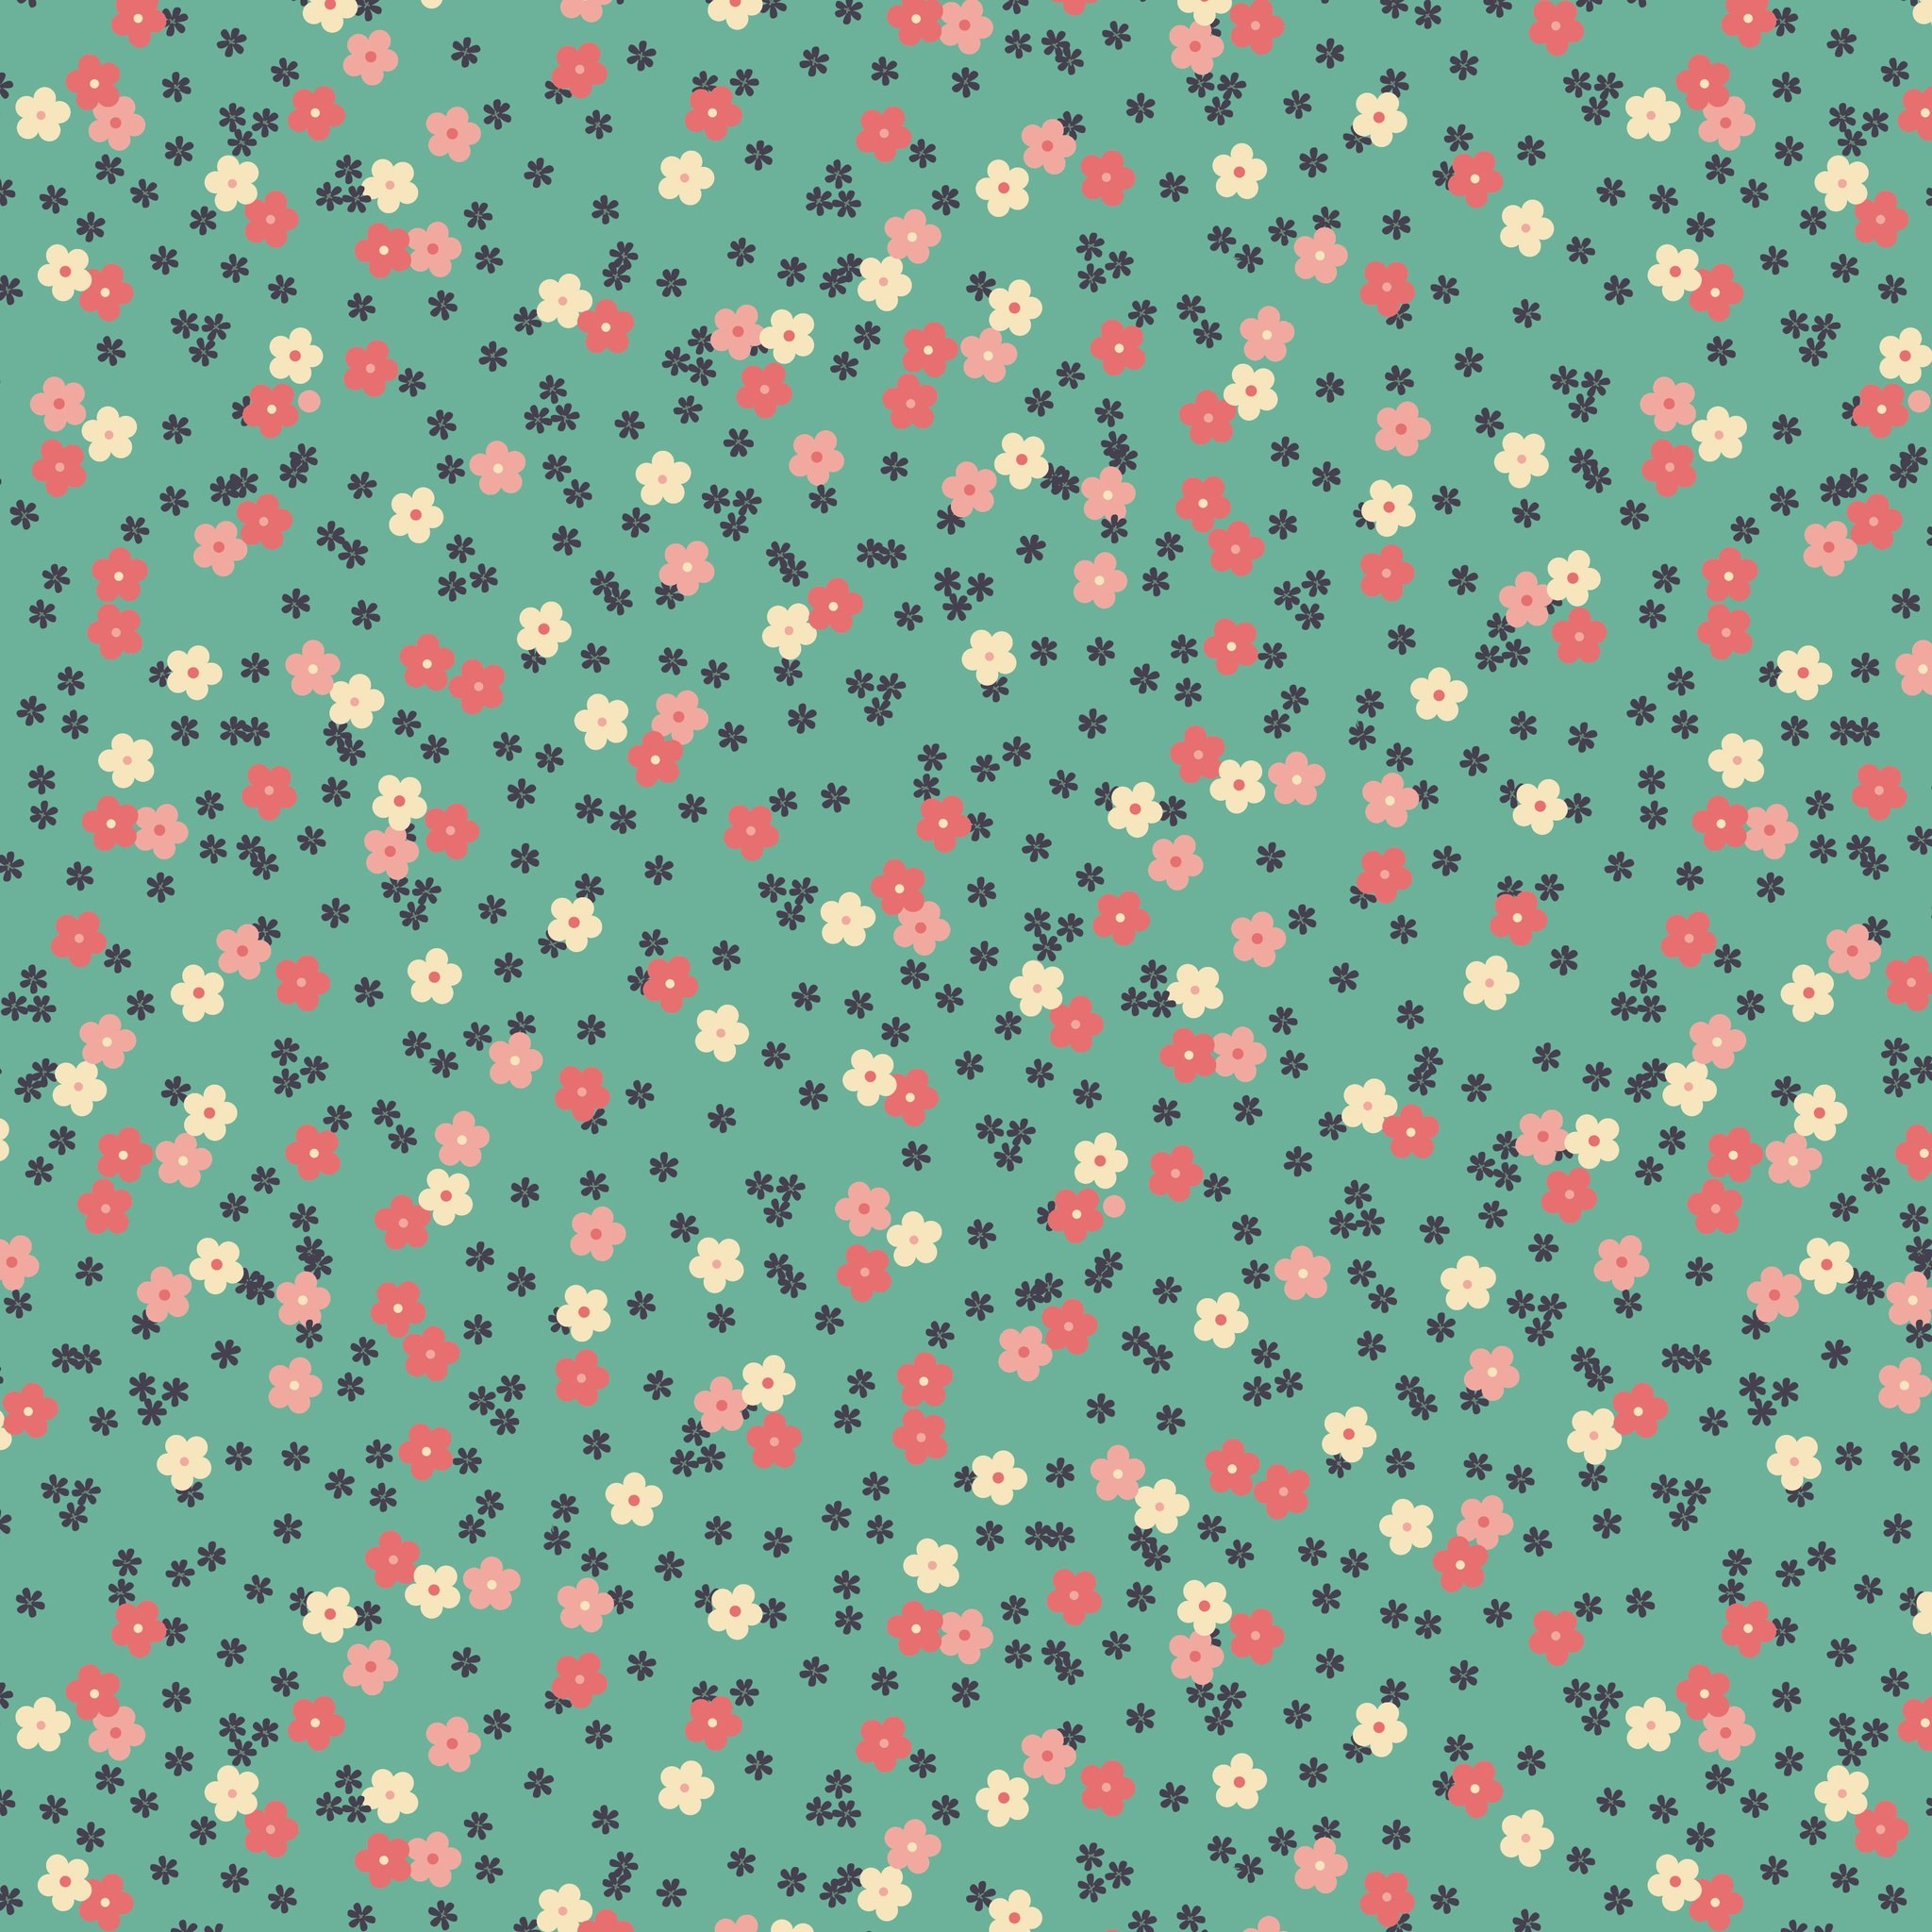 2048x2048 background, flowers, cute